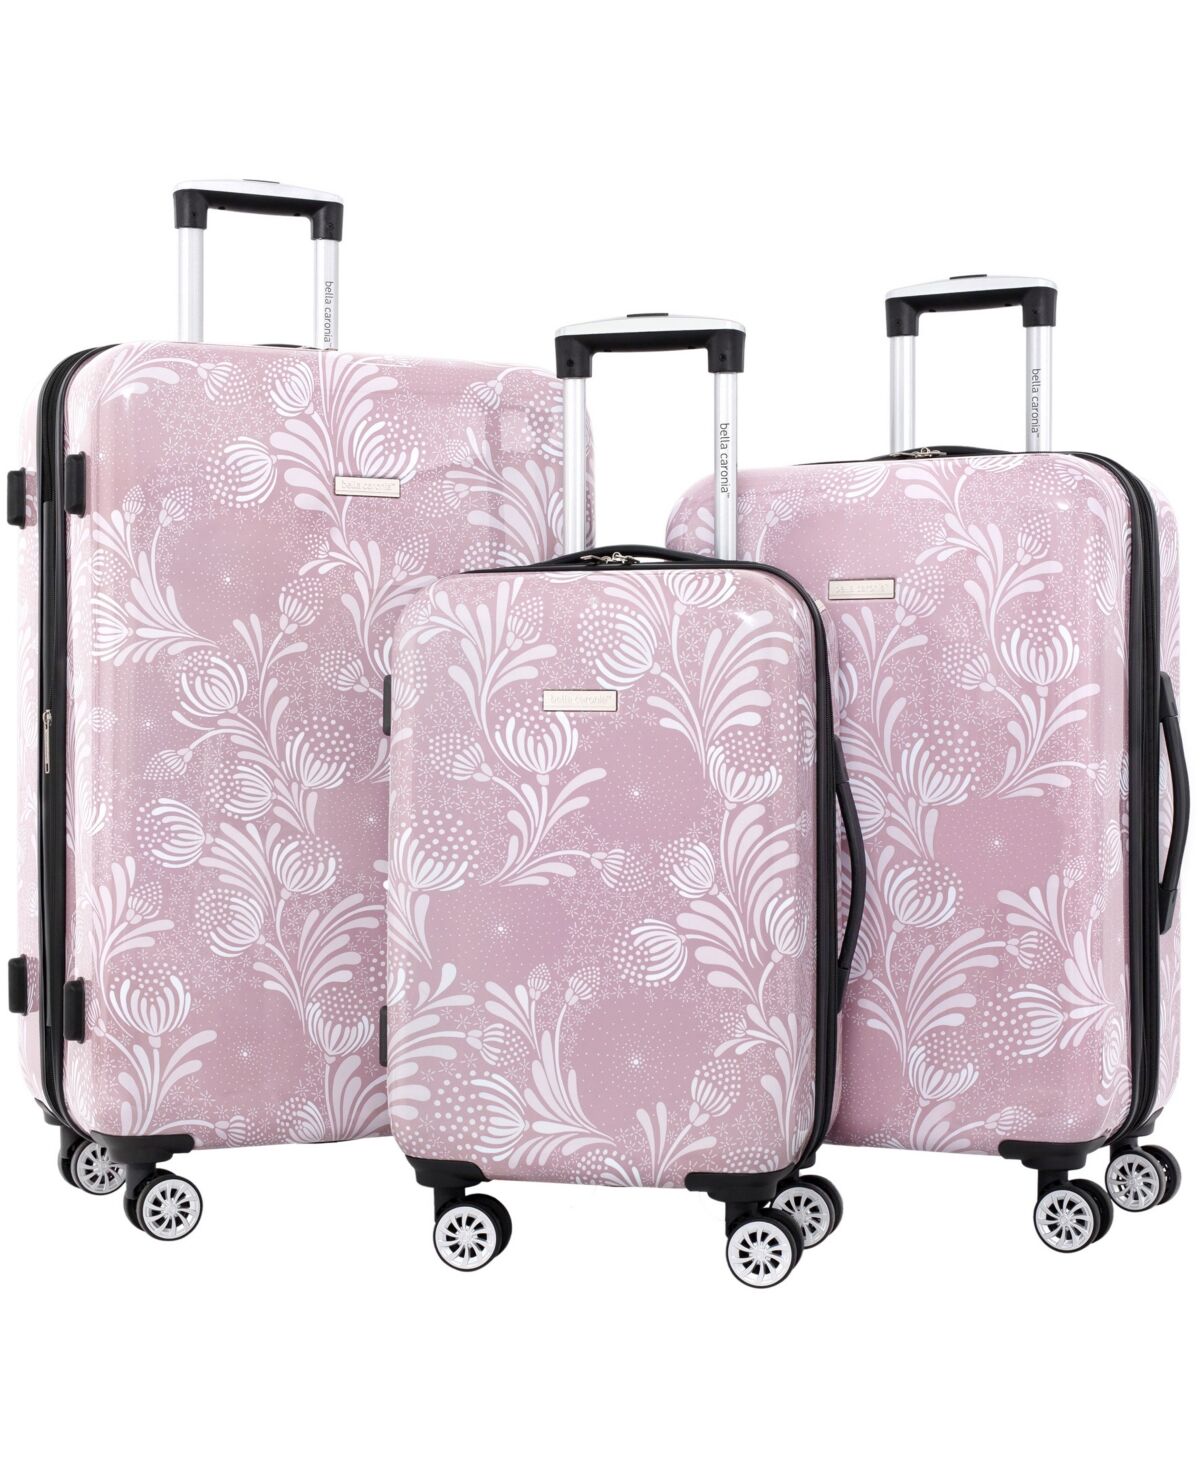 Bella Caronia 3 Piece Expandable Rolling Hard-Sided Luggage Set with 8 Wheels Spinners - Selva